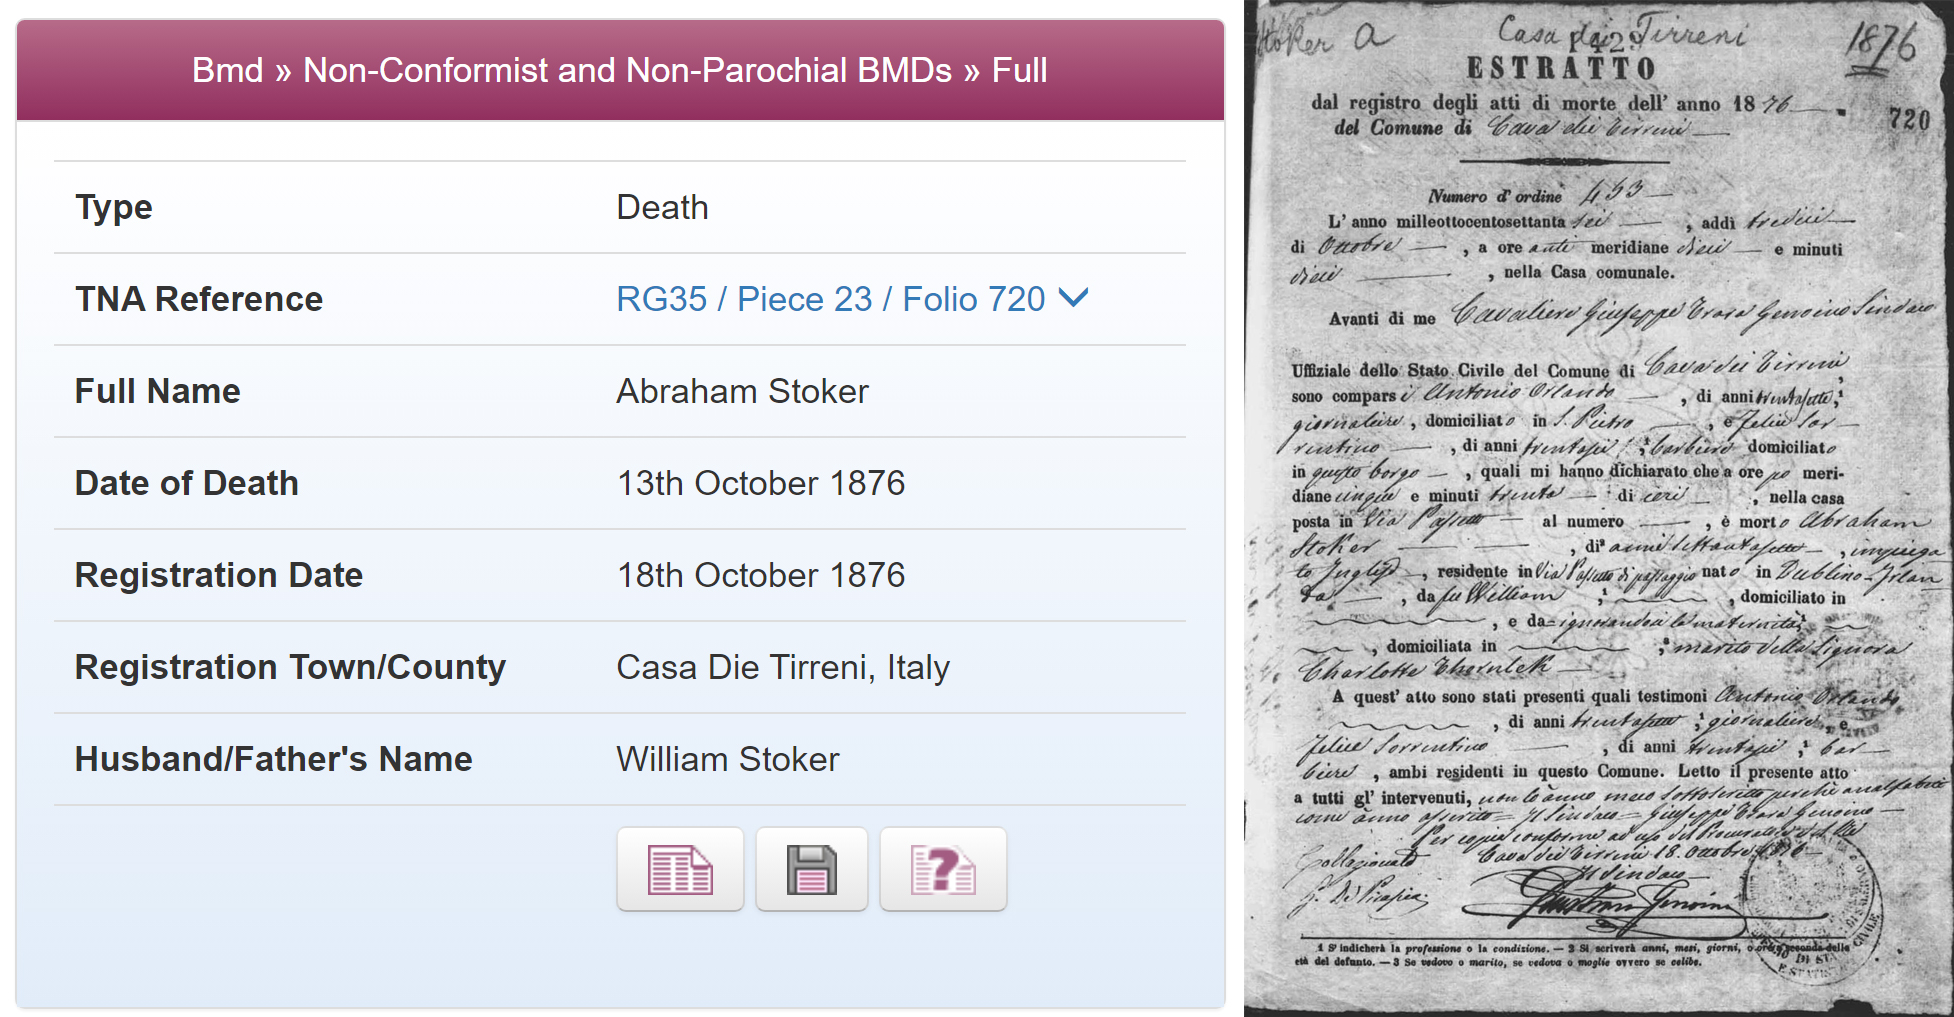 Abraham Stoker's death record in the Non-Conformist Registers at TheGenealogist.co.uk